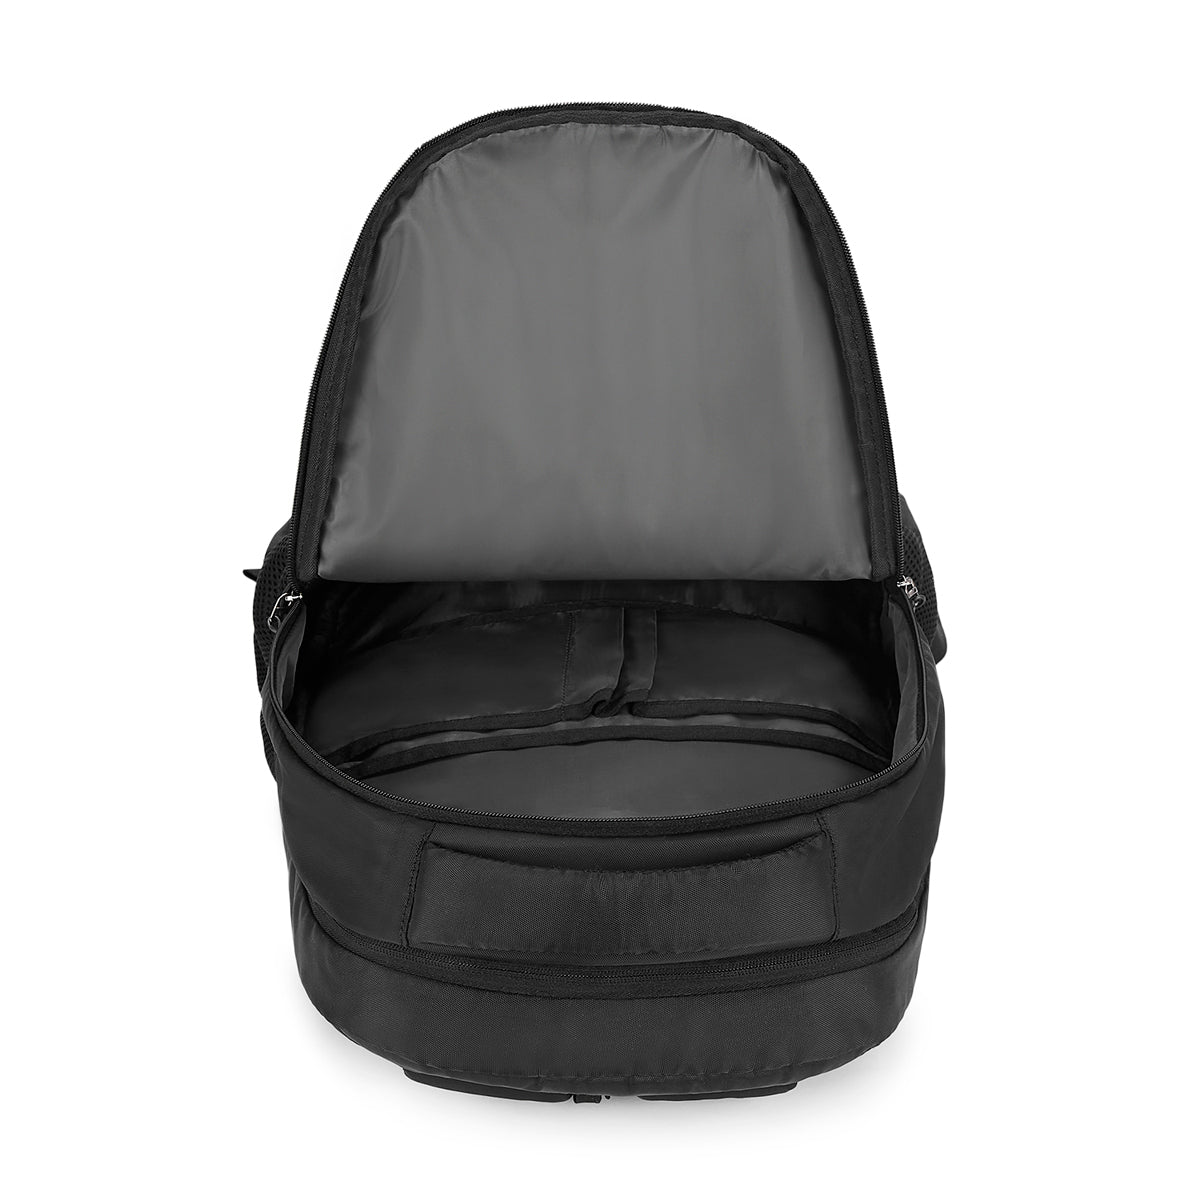 United Colors of Benetton Calypso Laptop Backpack Black